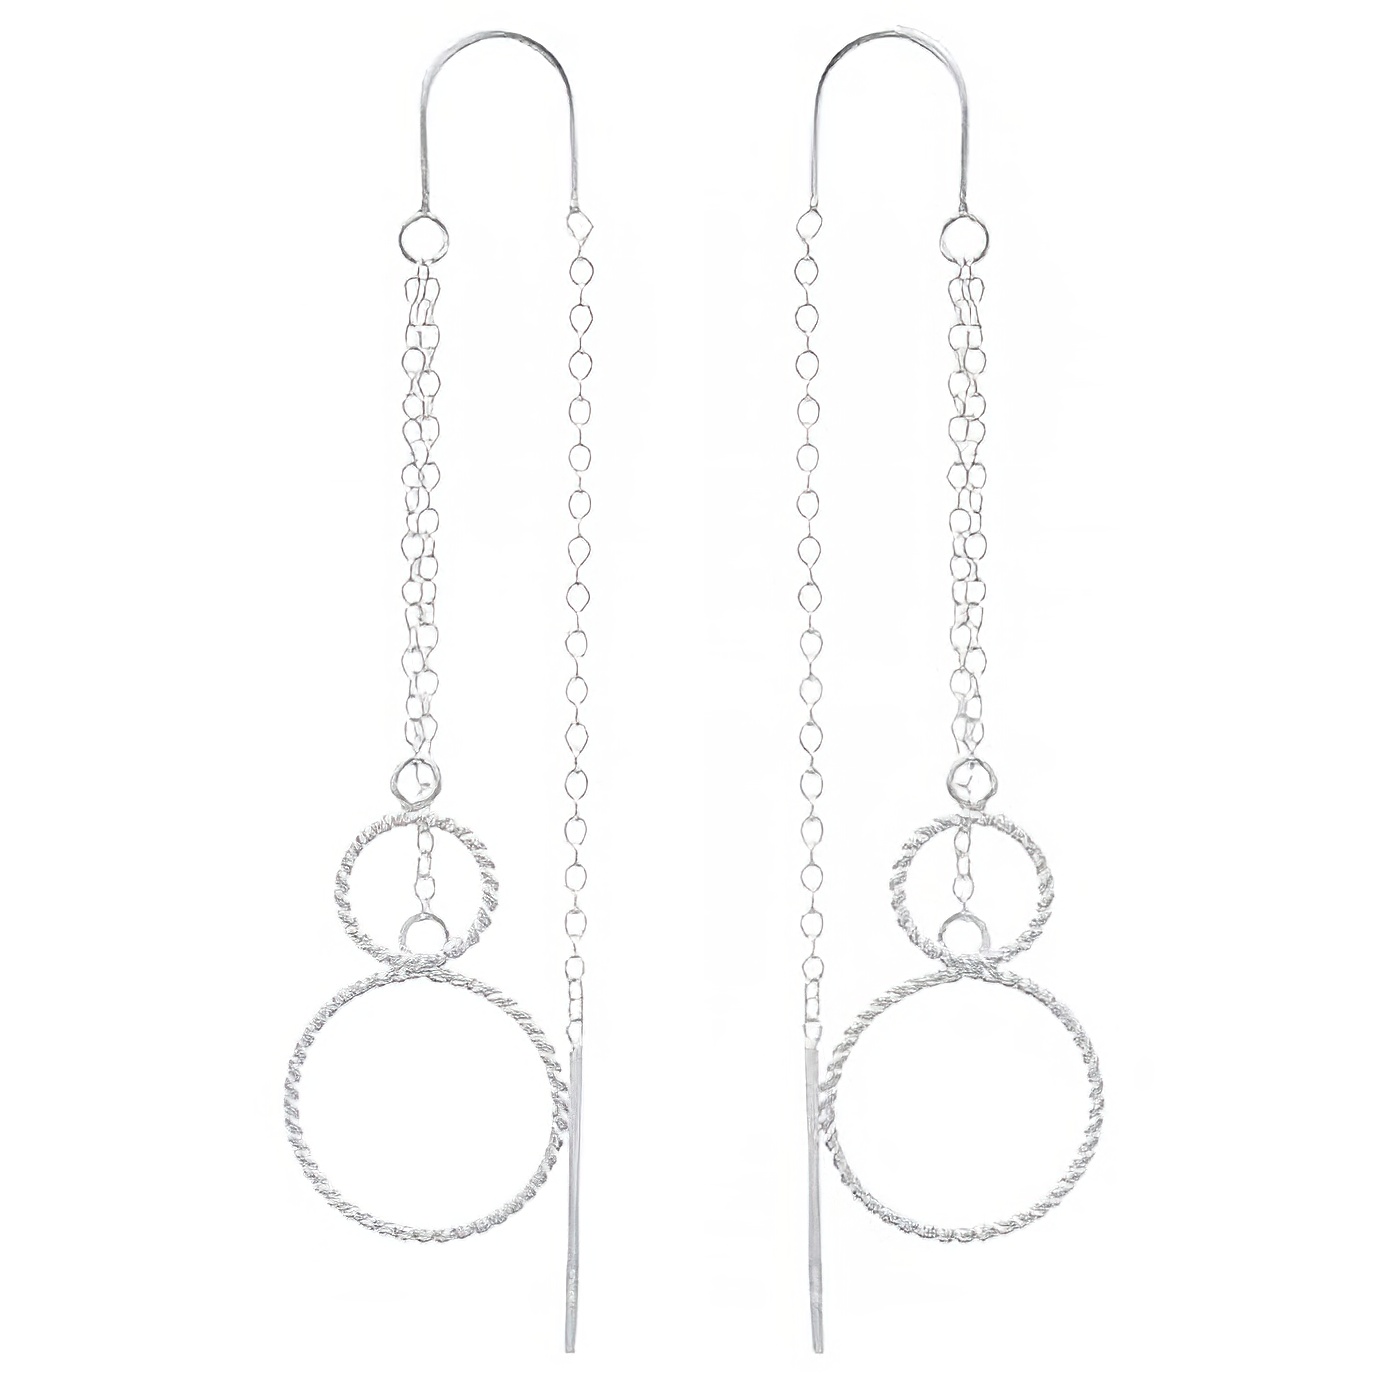 Dangling Circles On Sterling Silver Chain Threader Earrings 